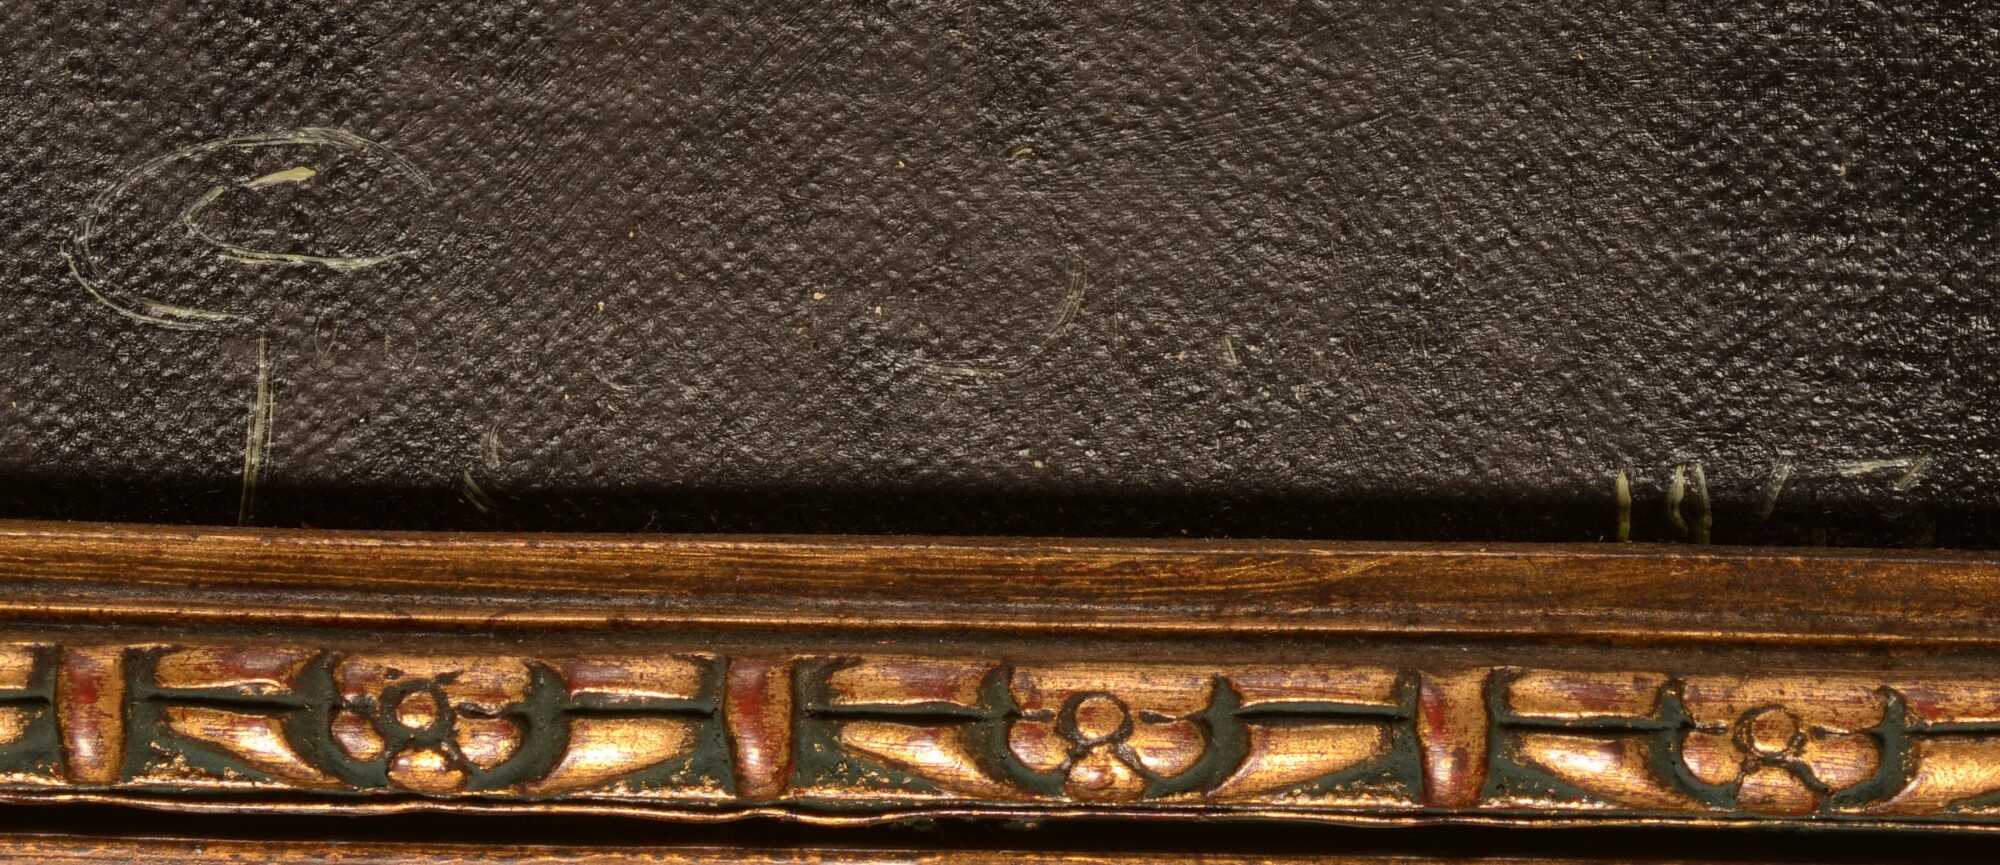 Georges Steel — Signature of the artist and date, bottom right (slightly under the frame)